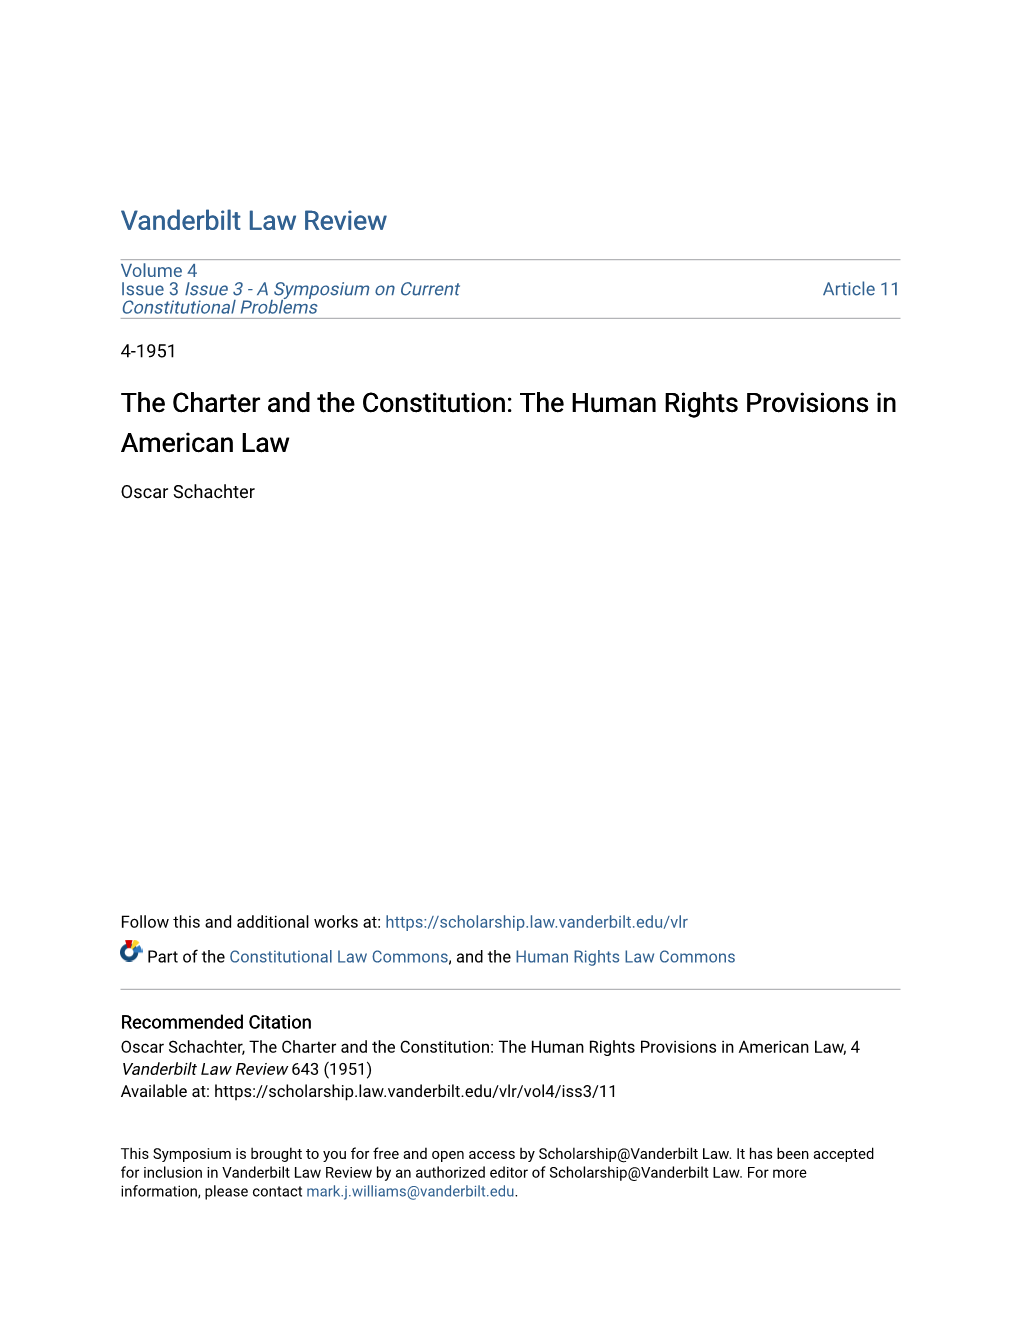 The Charter and the Constitution: the Human Rights Provisions in American Law